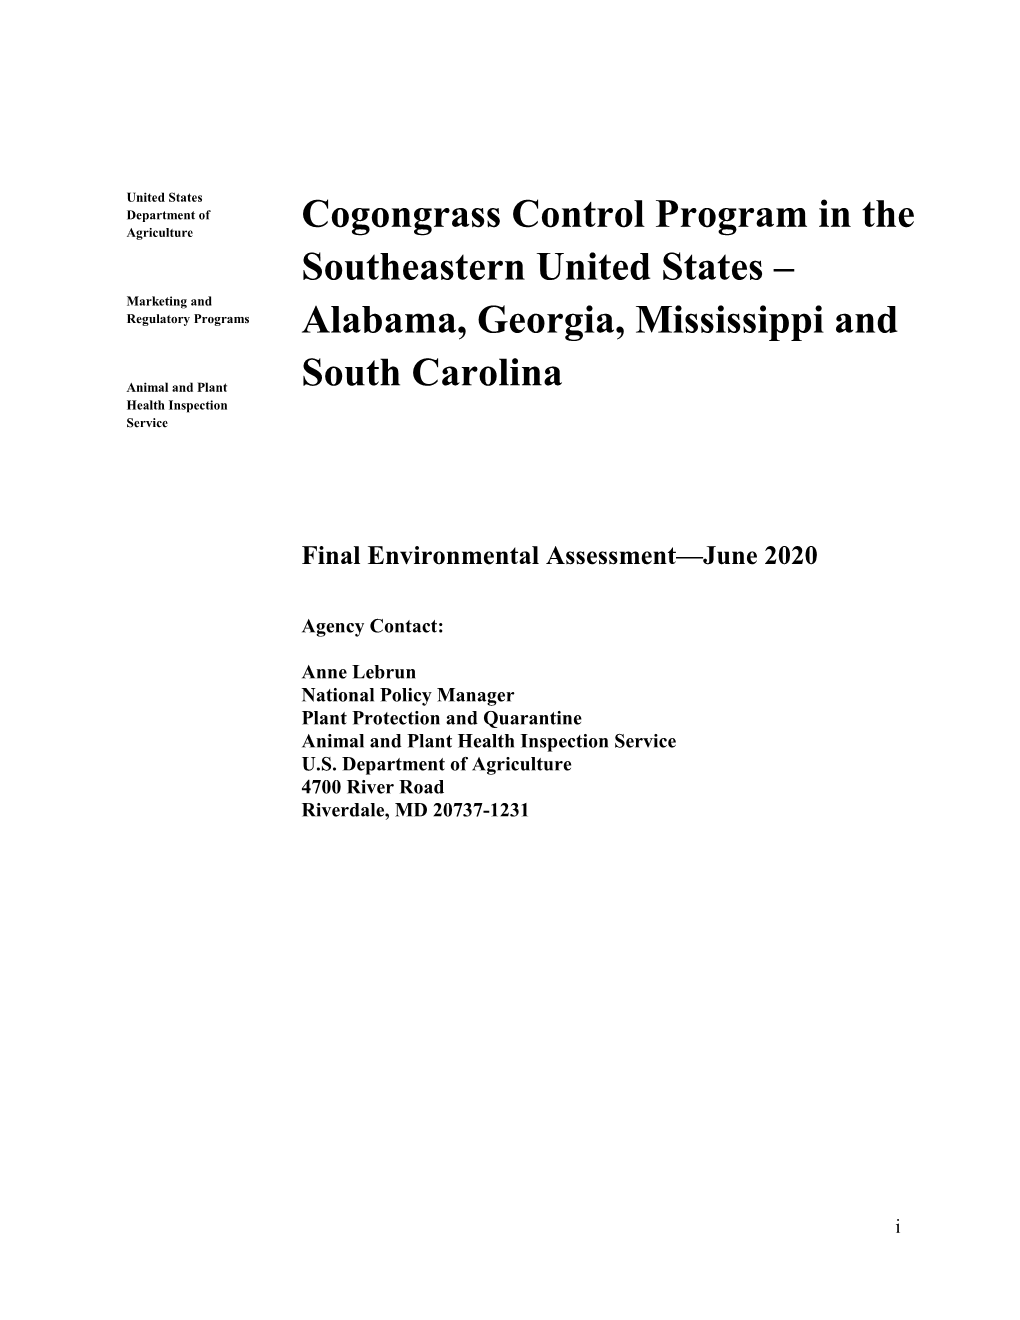 Cogongrass Control Program in the Southeastern United States – Marketing and Regulatory Programs Alabama, Georgia, Mississippi And